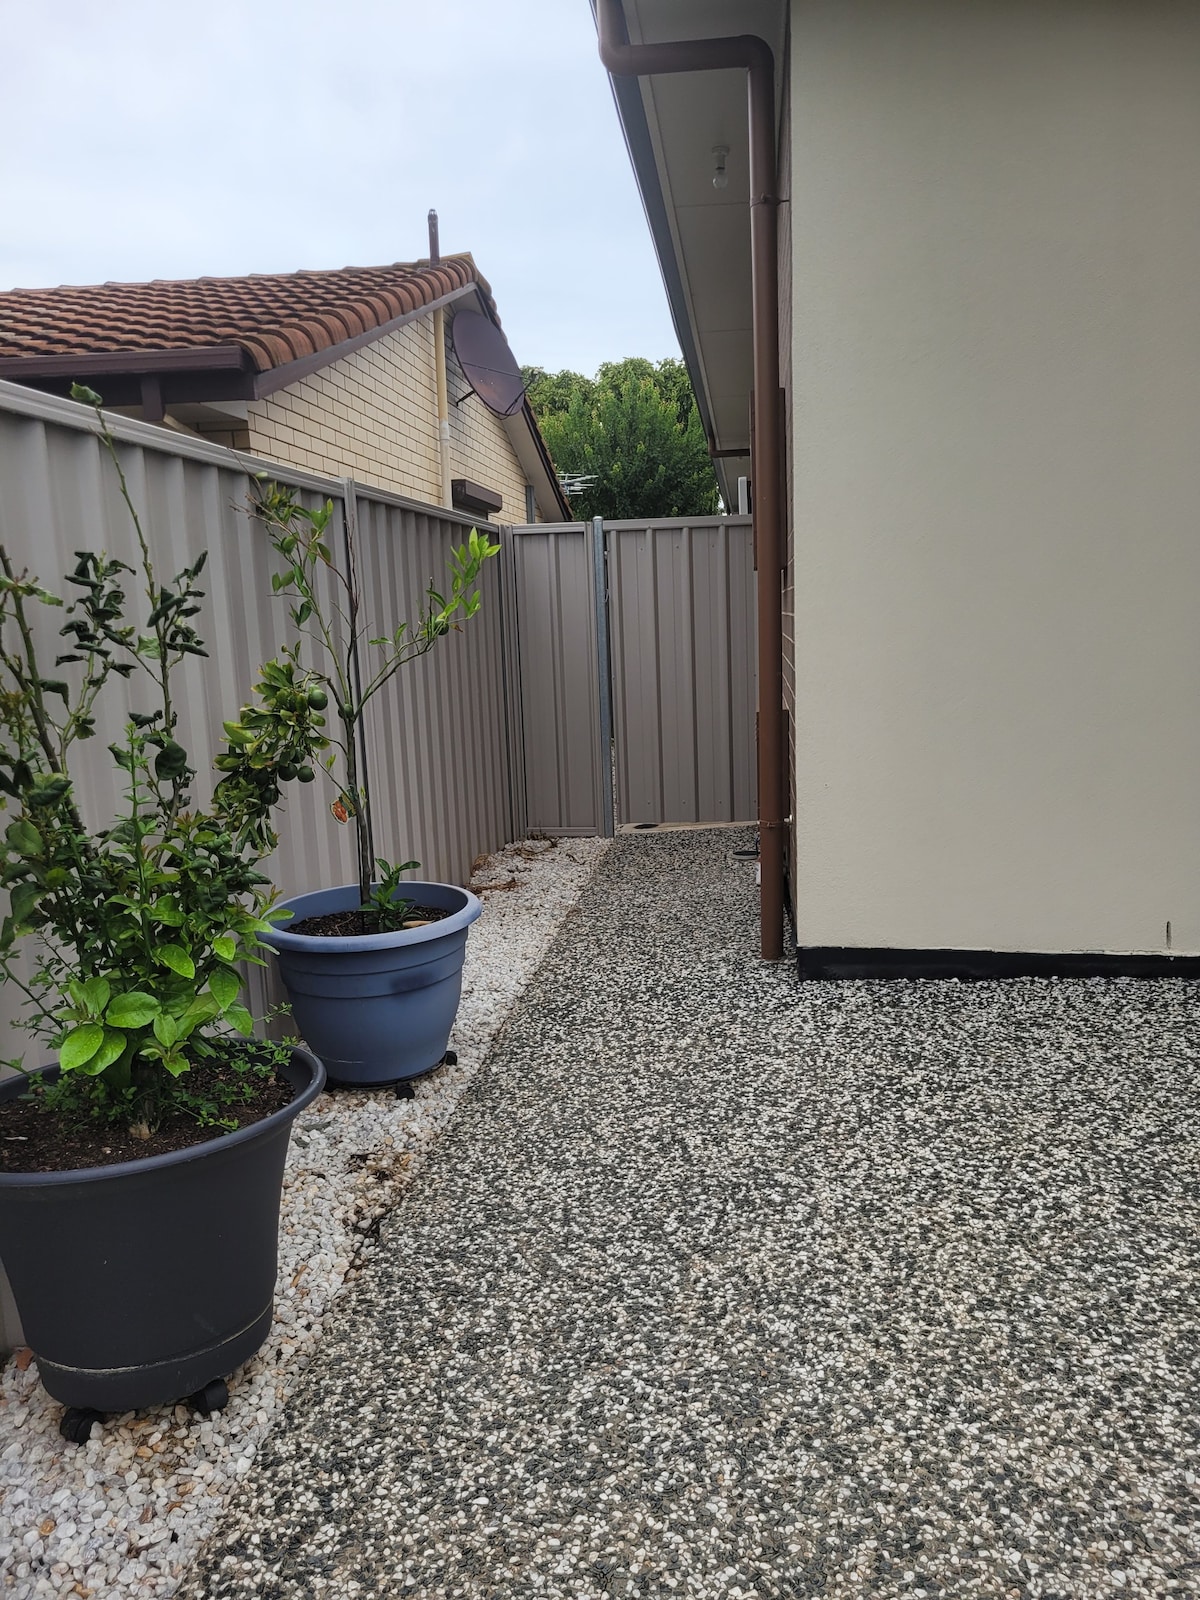 Reynella Retreat

spacious room available to rent